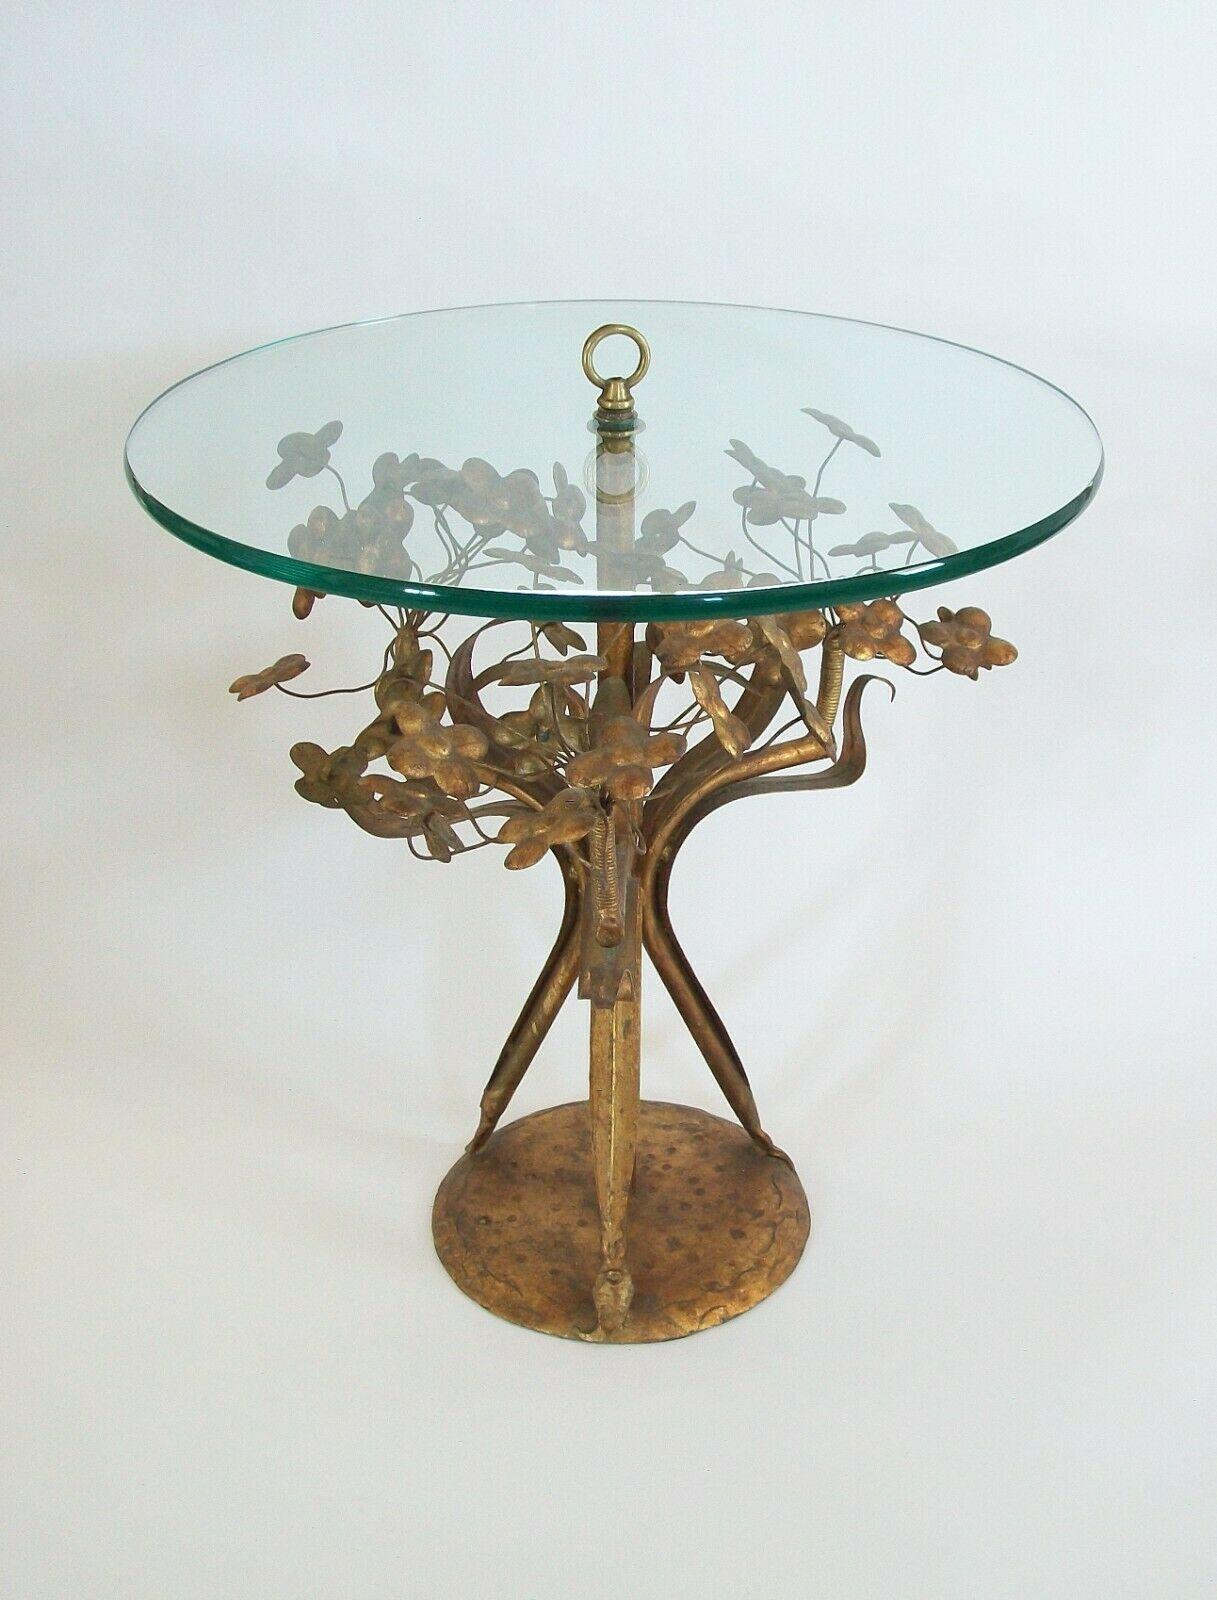 Rare Mid Century gilt metal 'flower' occasional table - flexible wire stems - ring finial/handle - 20